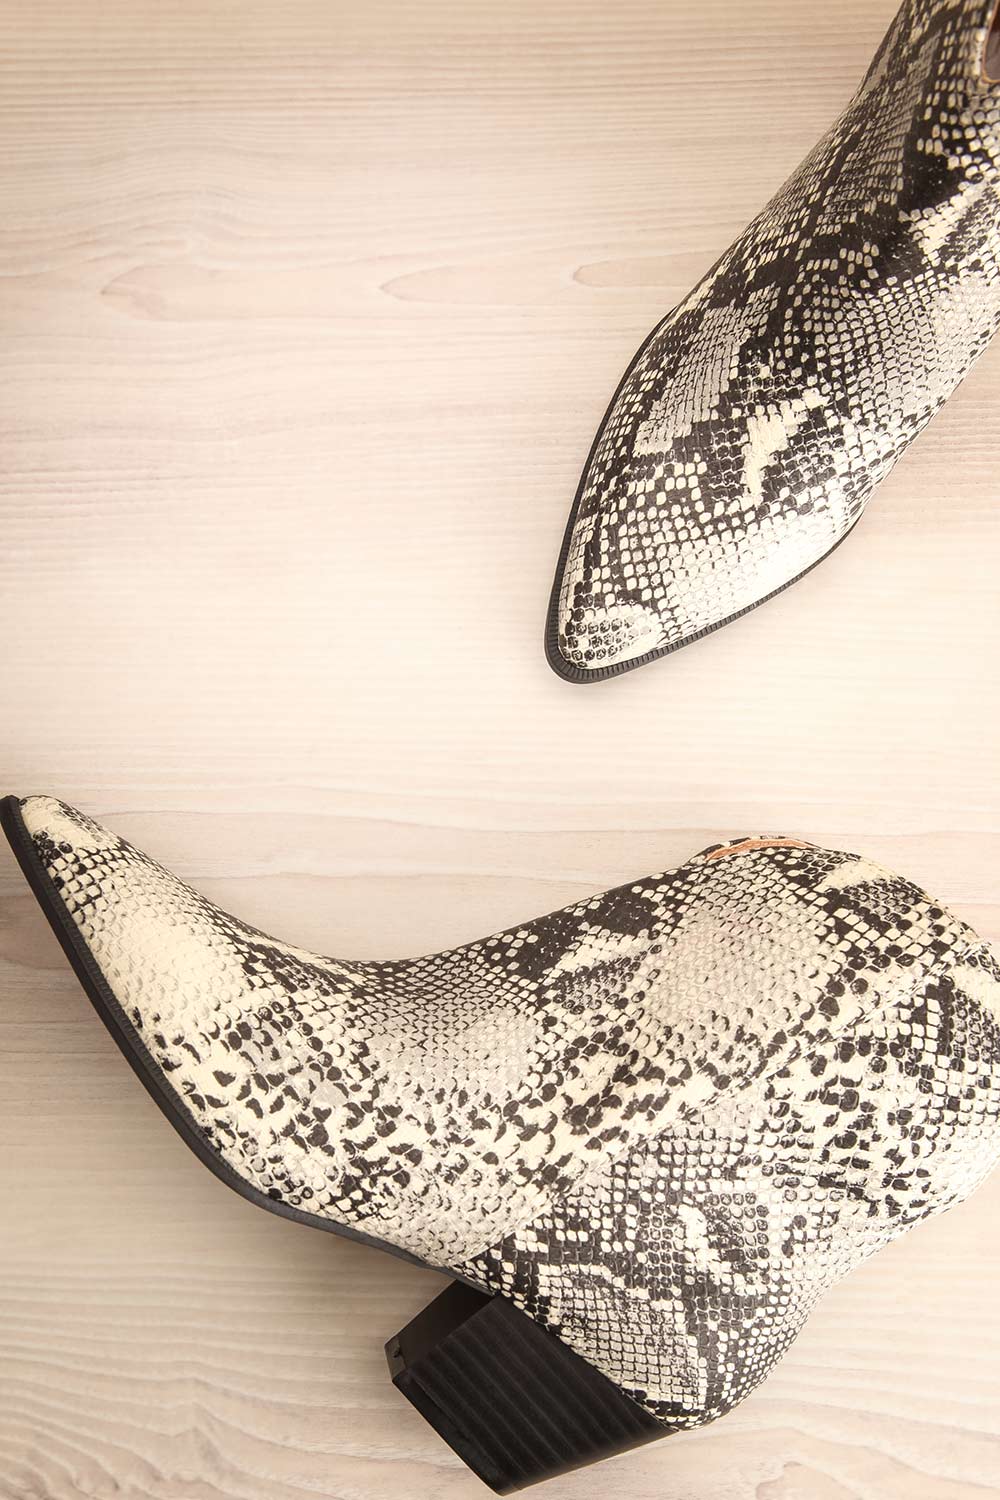 snake print western boots